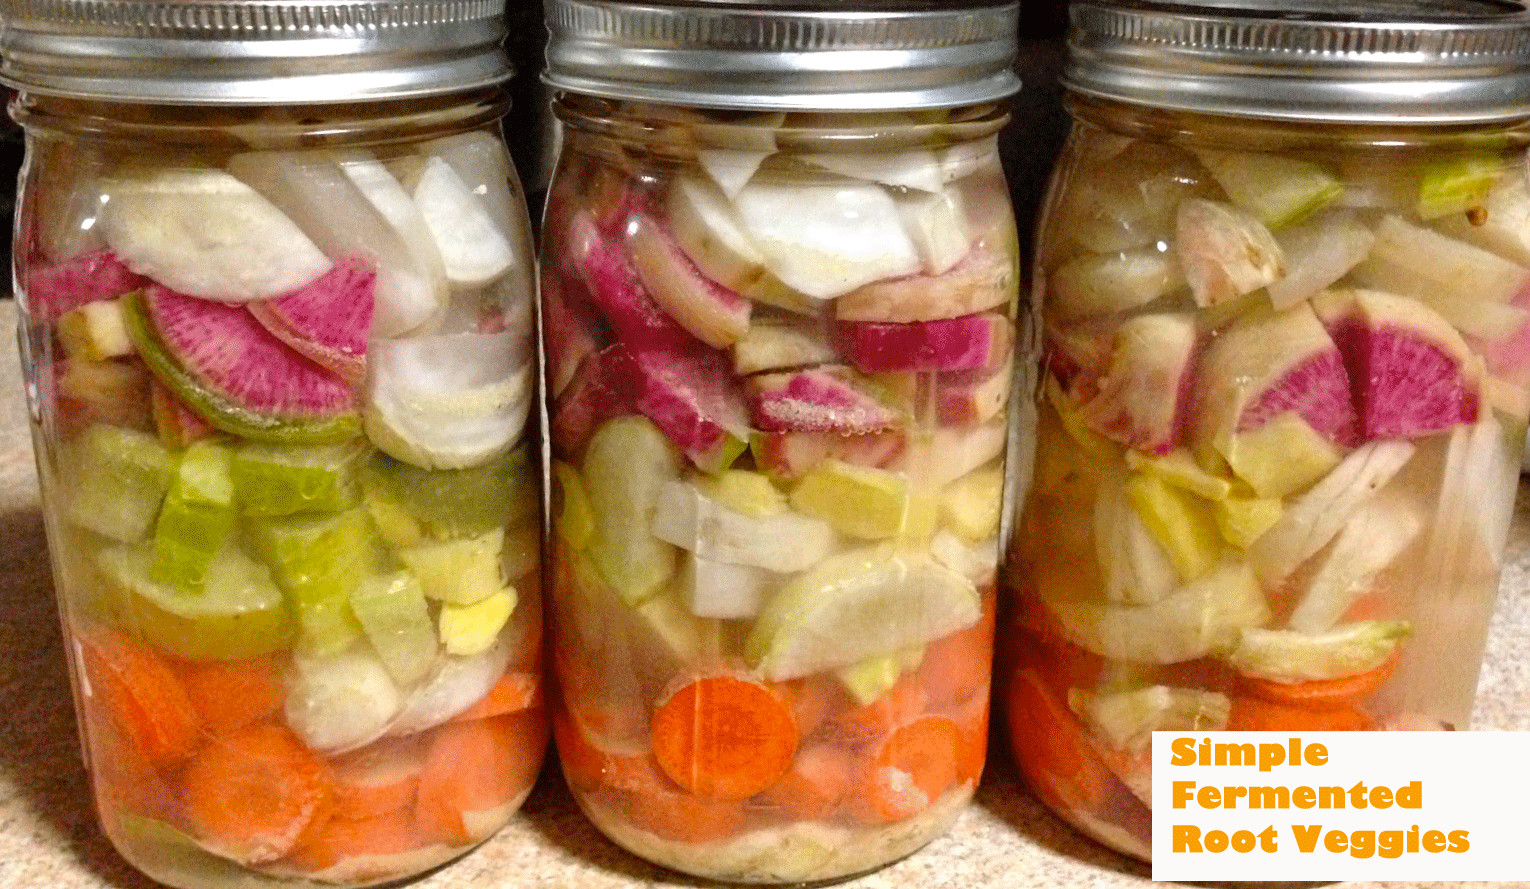 How to Ferment Vegetables - Make Your Own Fermented Vegetables